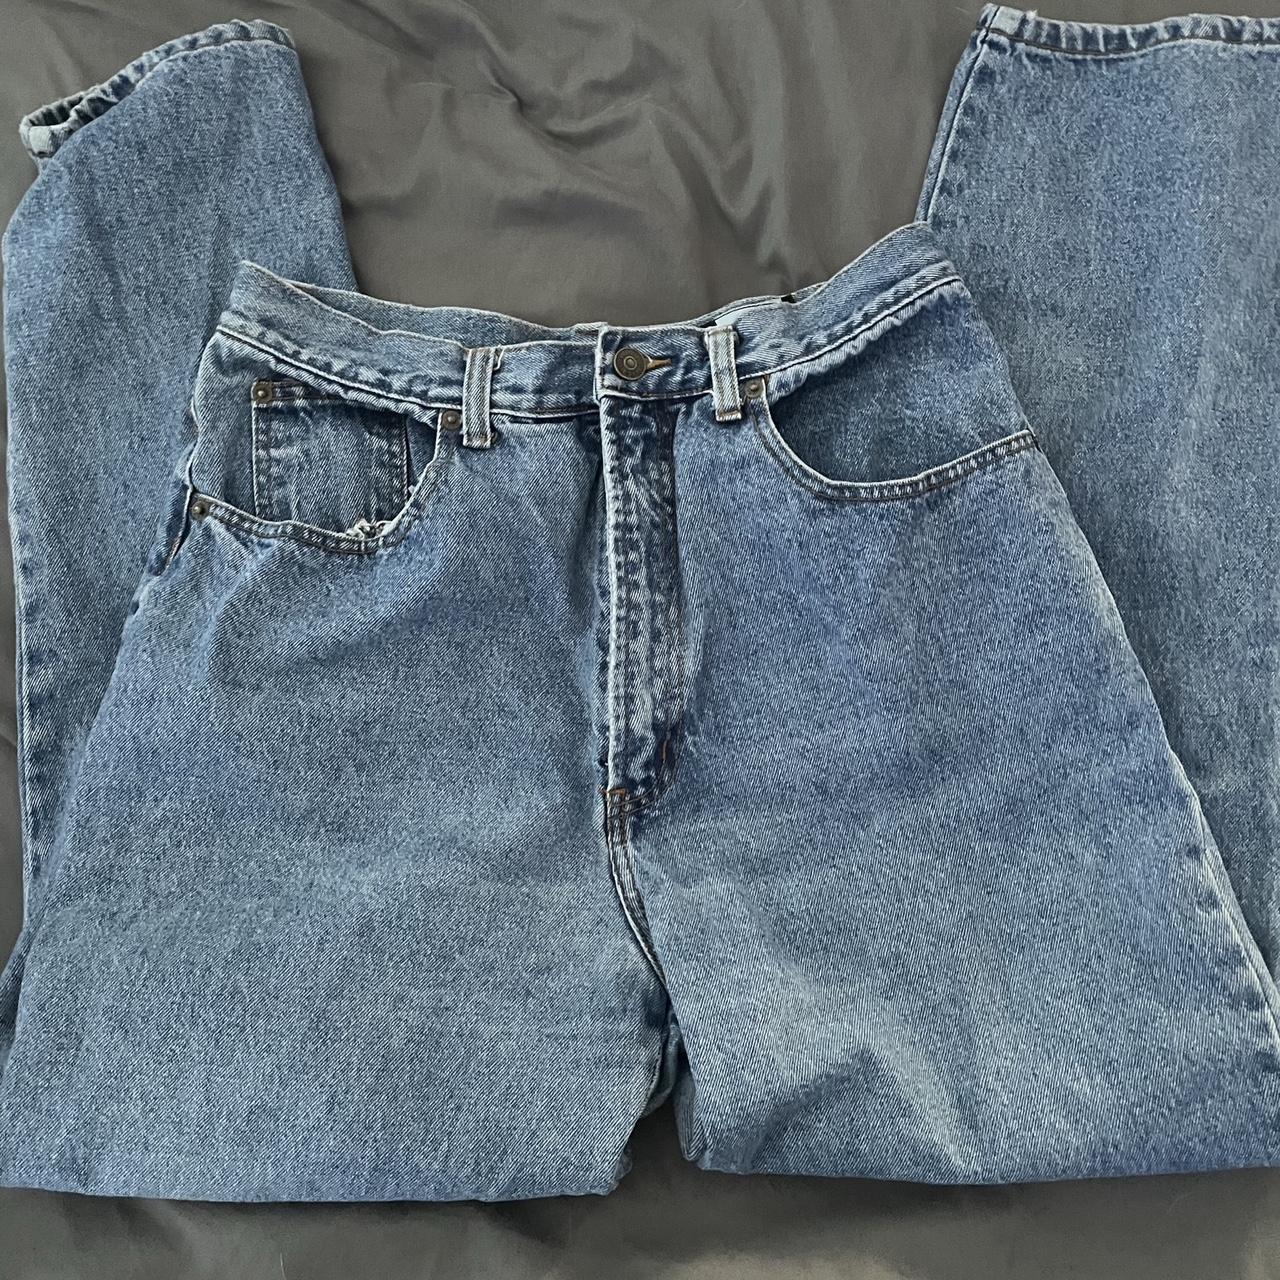 Williwear straight leg baggy jeans, these jeans are... - Depop